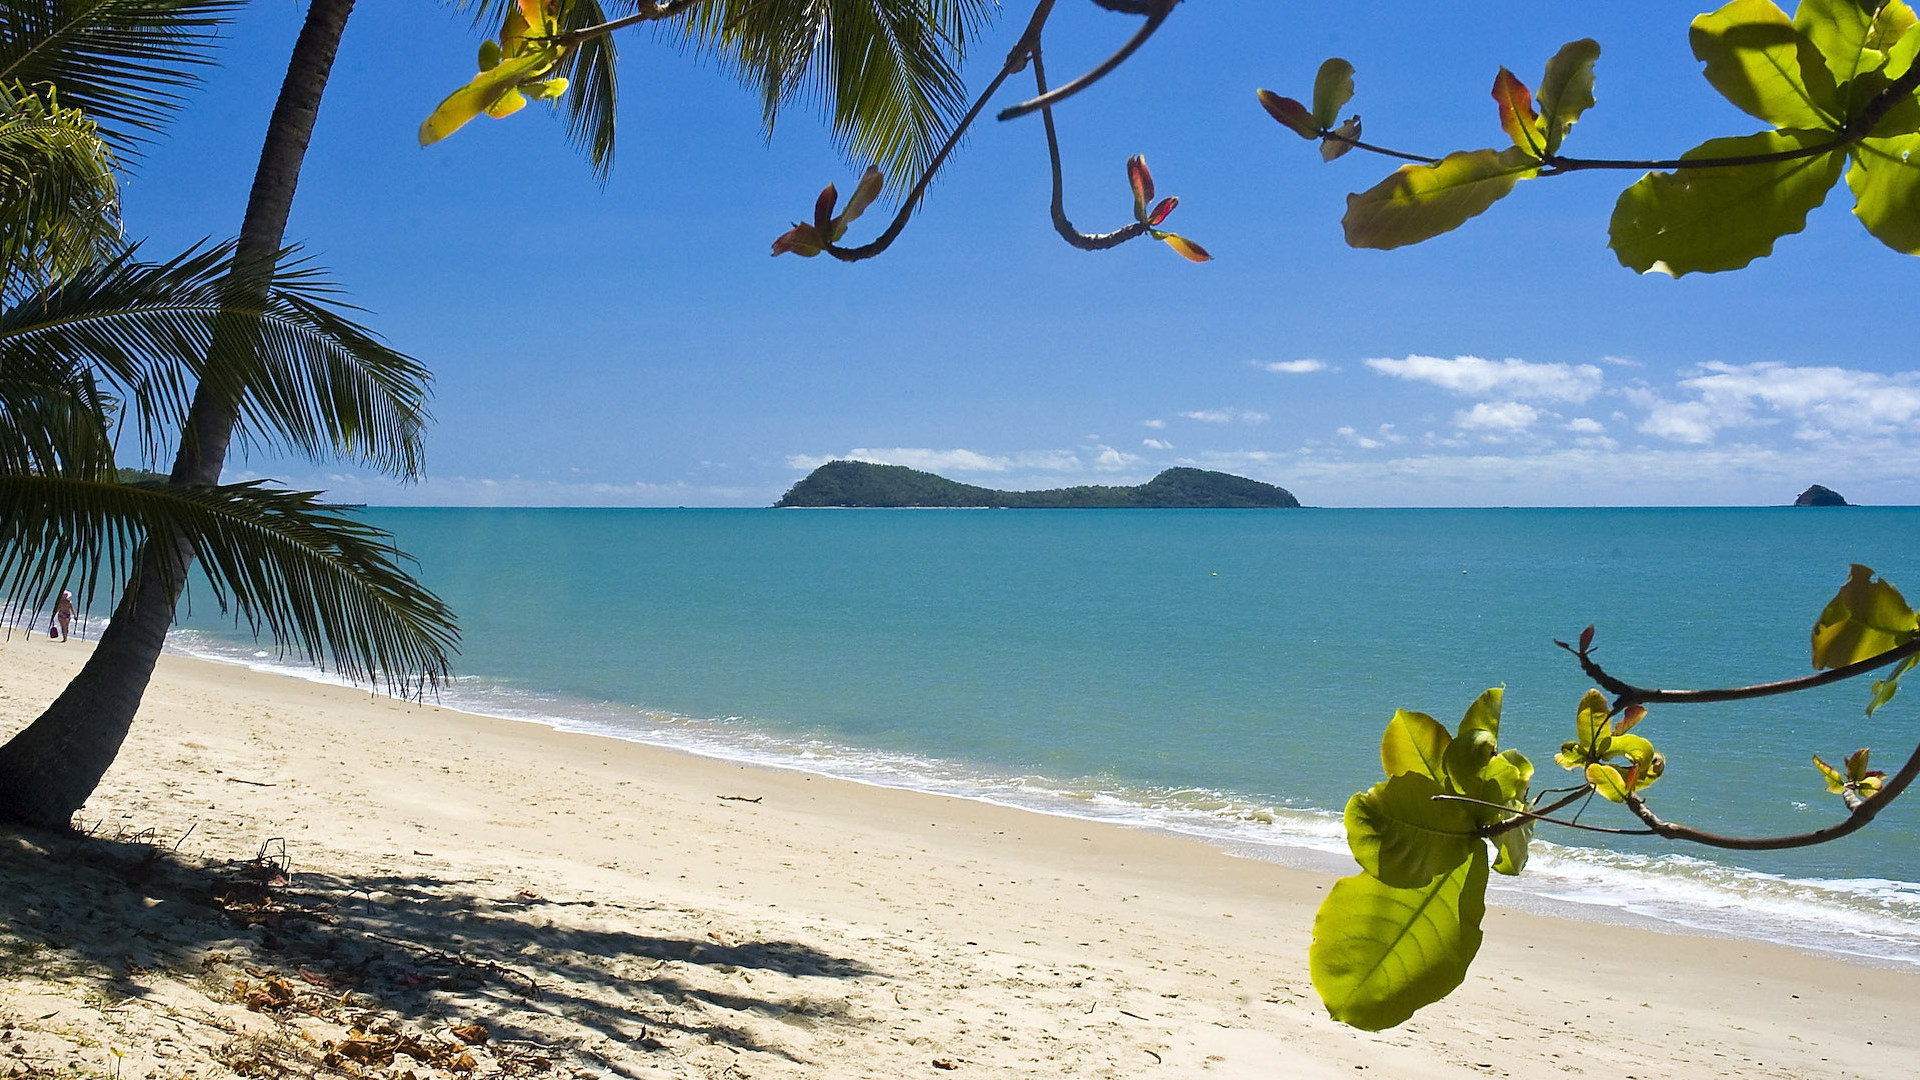 View of Double Island, seen through beach almond tree leaves from the shore along Palm Cove